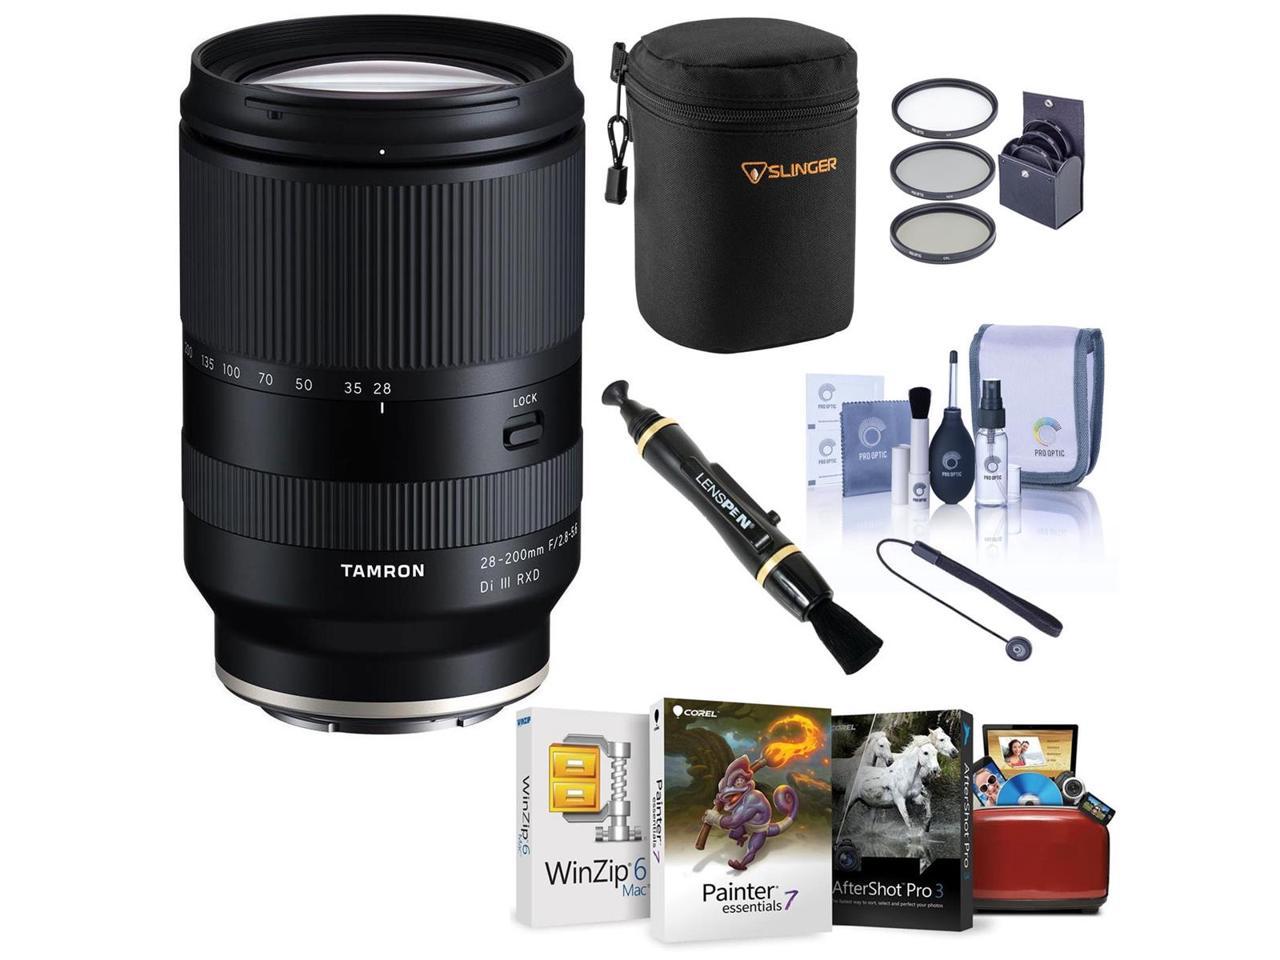 Tamron 28-200mm f/2.8-5.6 Di III RXD Lens for Sony E with Mac Software & Acc.